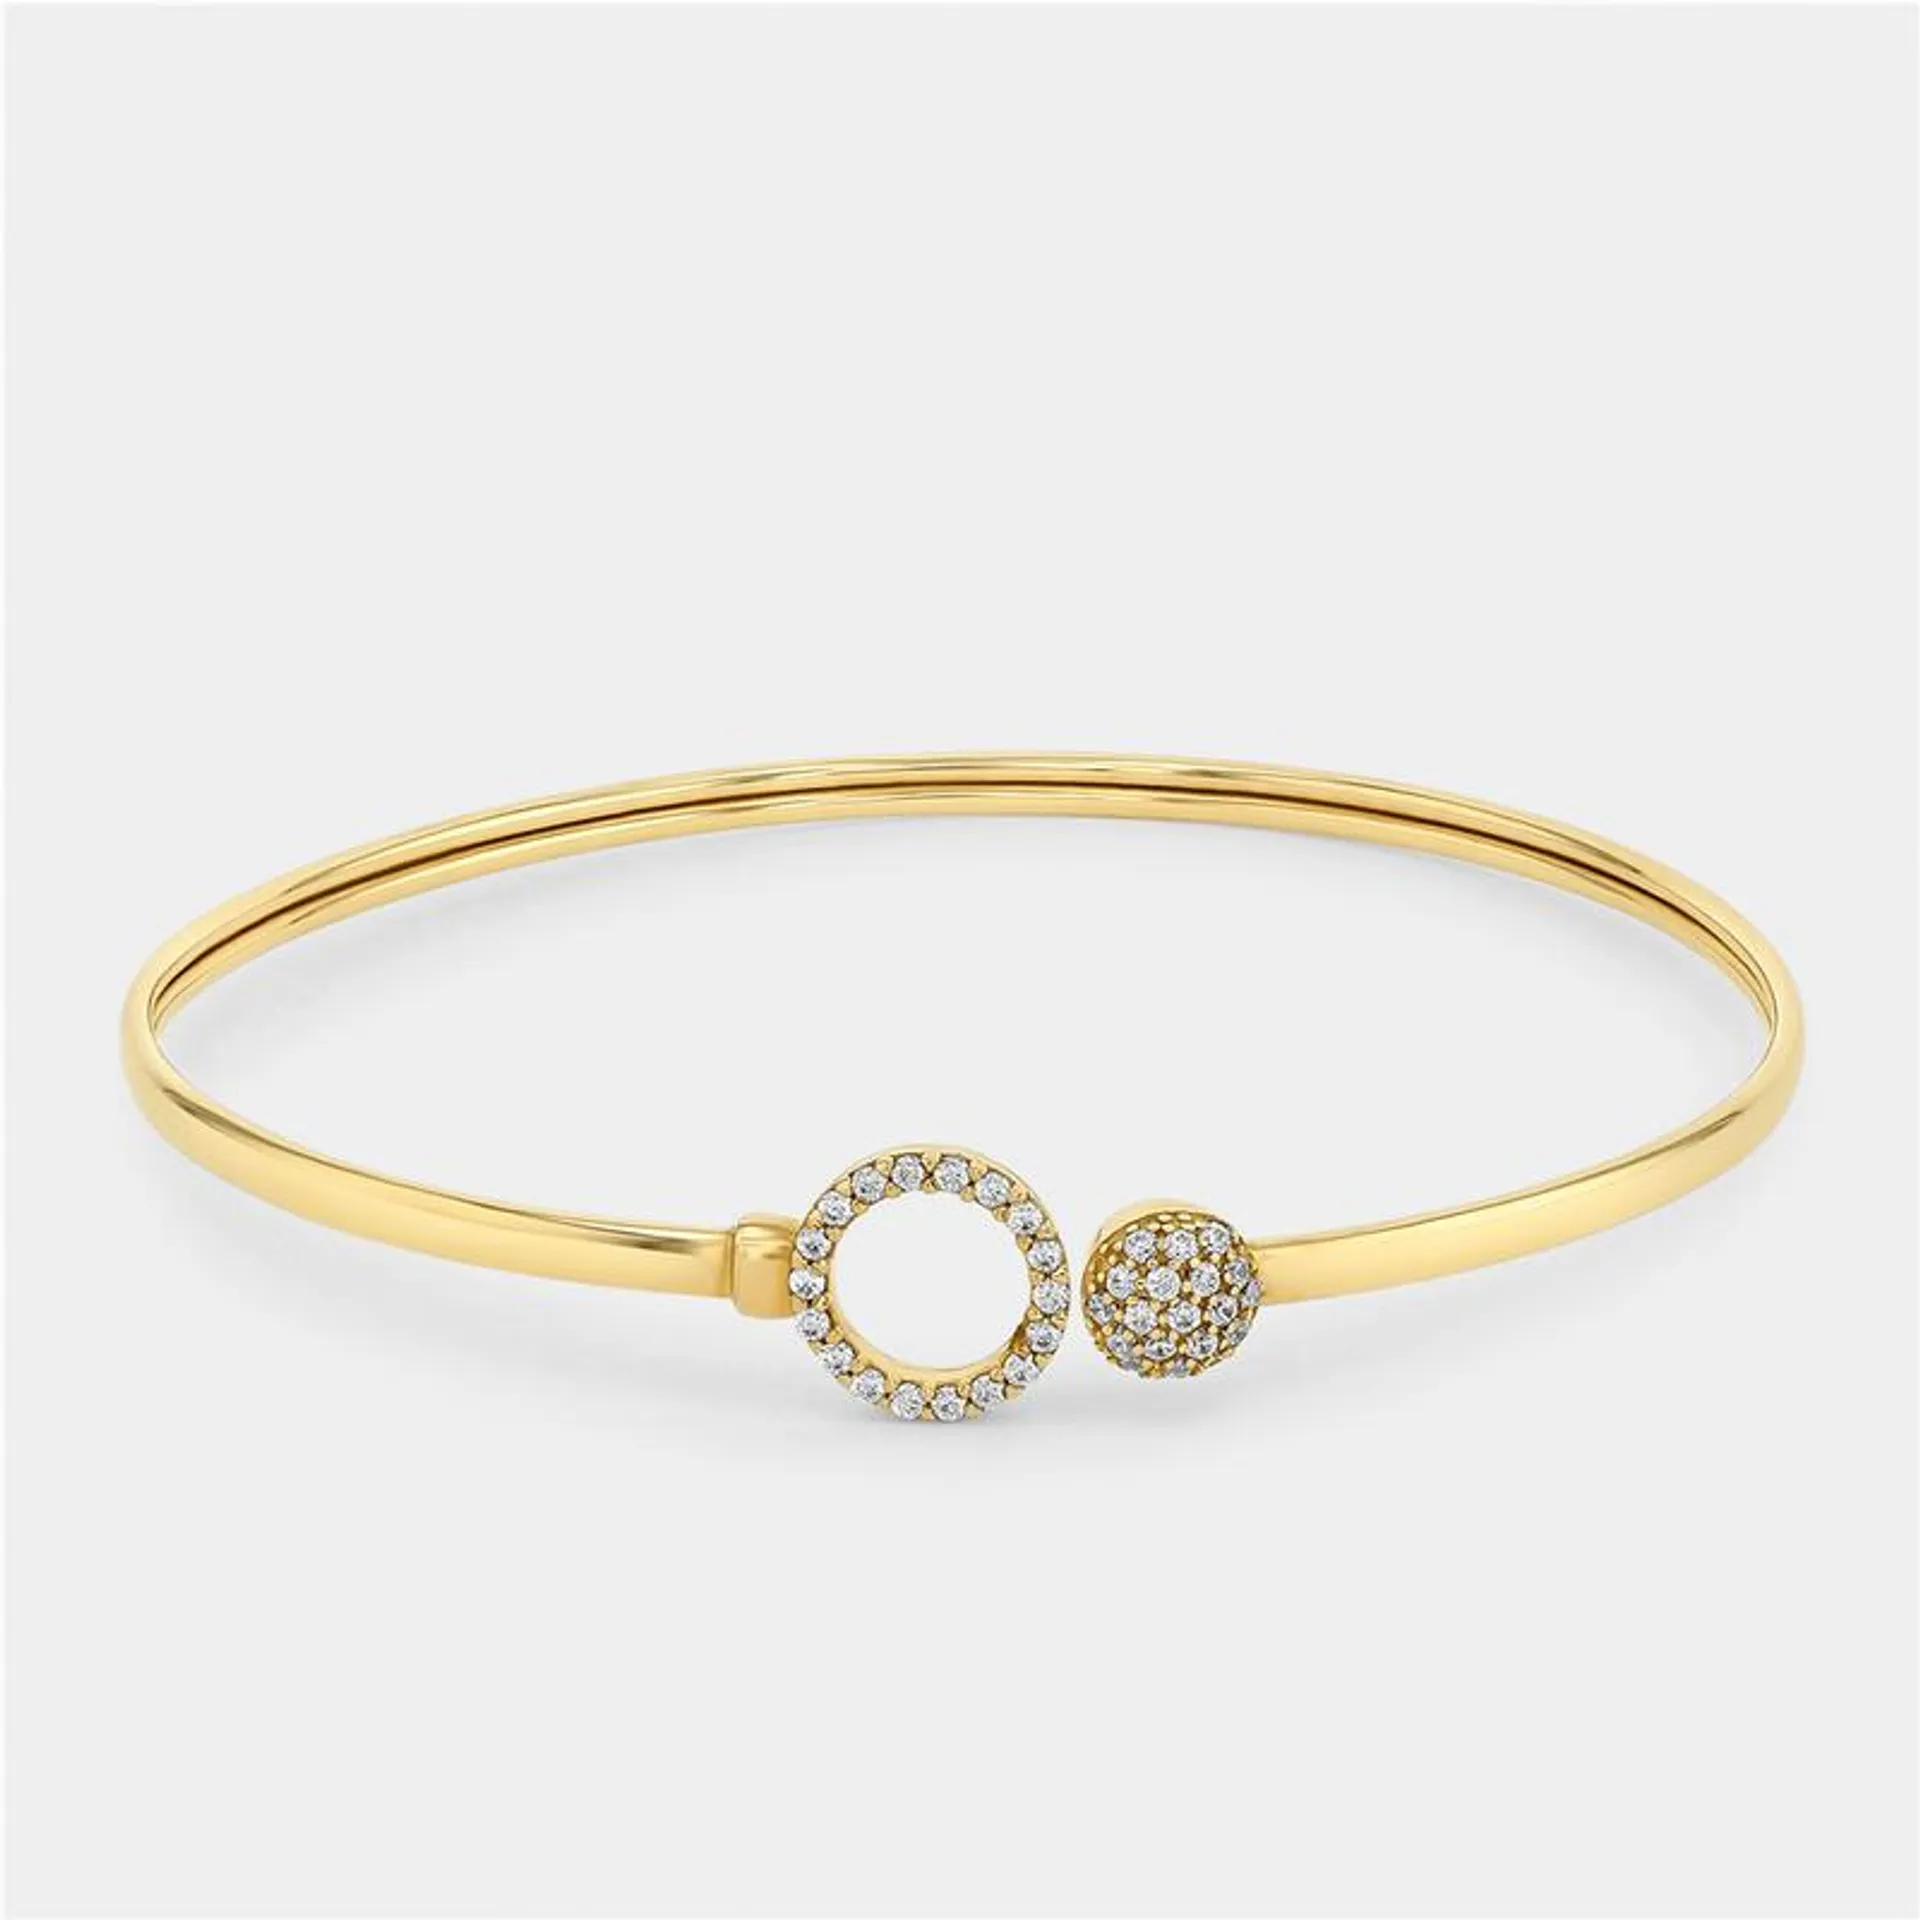 Sterling Silver & 9ct Gold, Cubic Zirconia Bangle